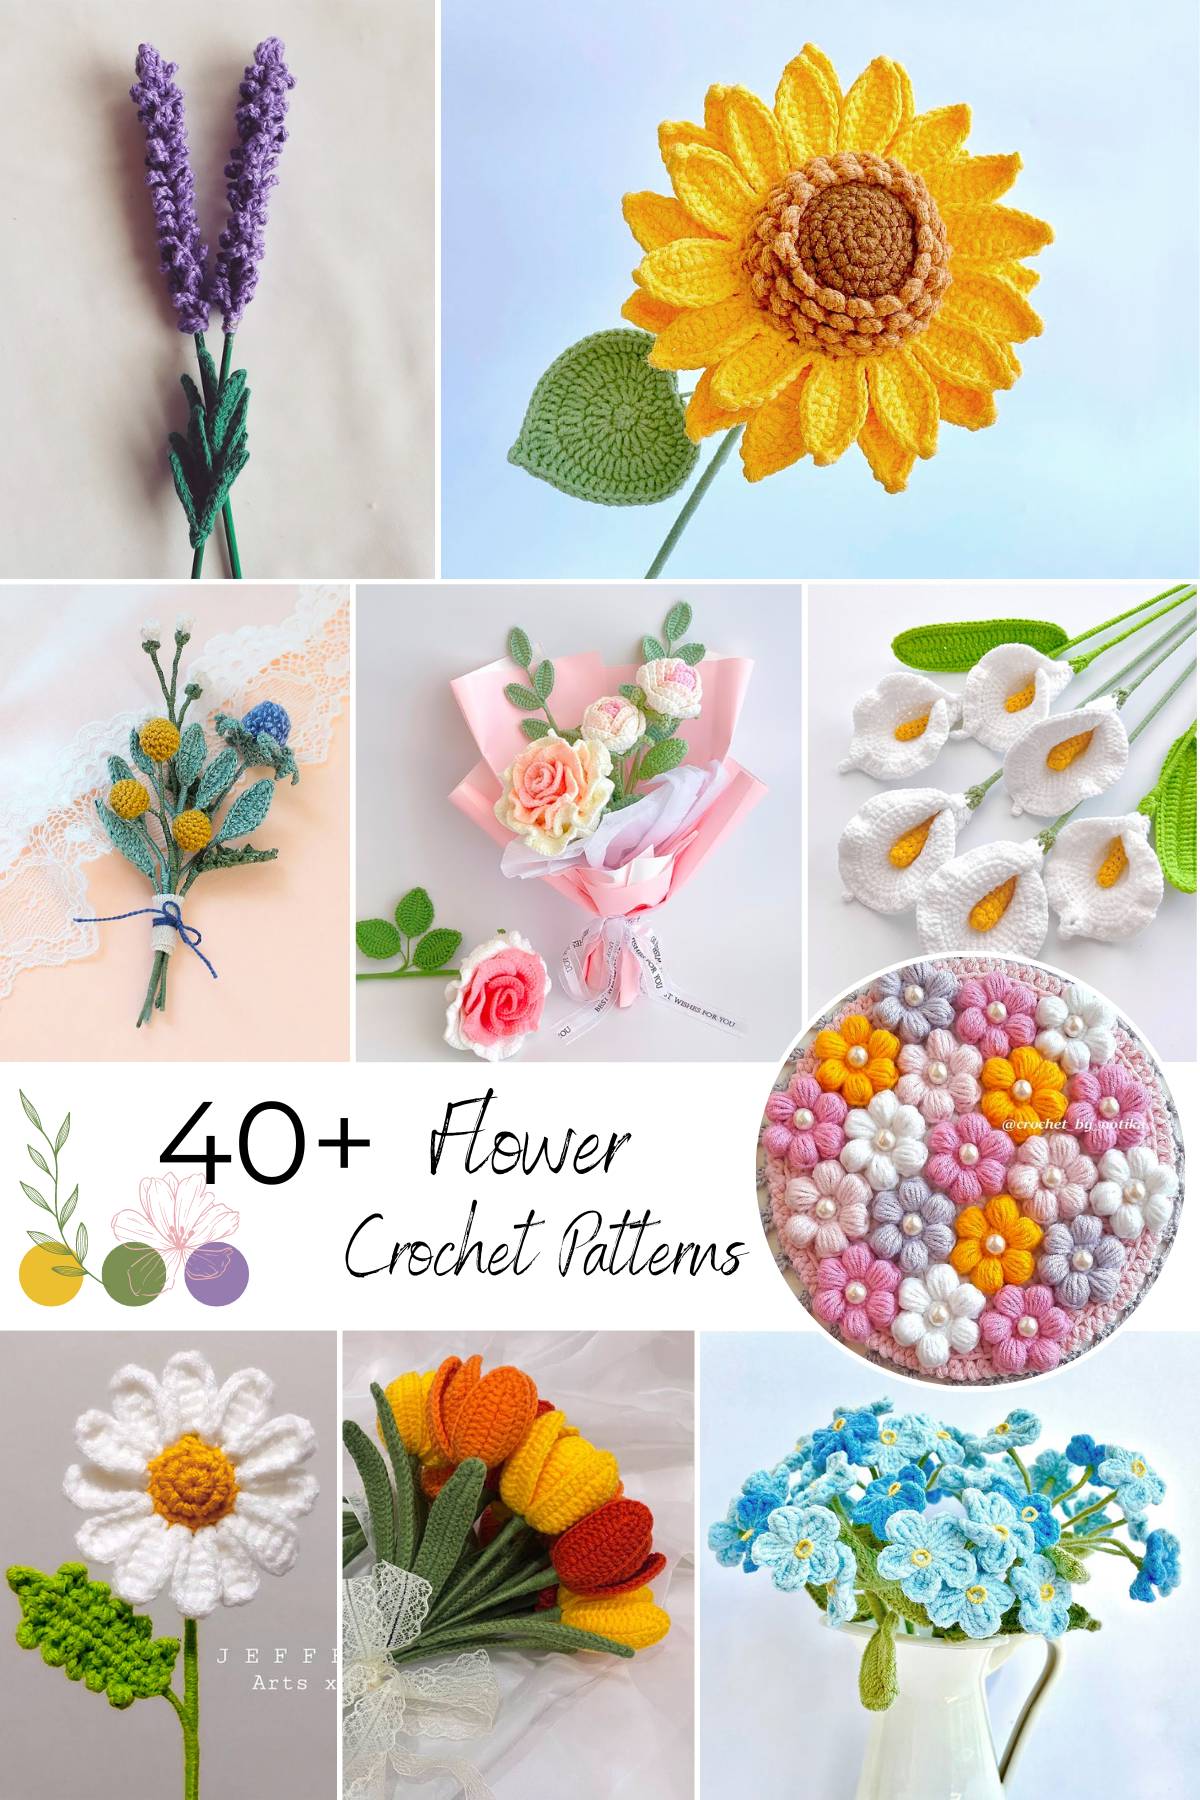 We've handpicked these 48 crochet flowers pattern for you, and each one comes with a free pattern. Whether you are looking for simple crochet flowers to make or crochet flower bouquet patterns for any occasion, we've got you covered.